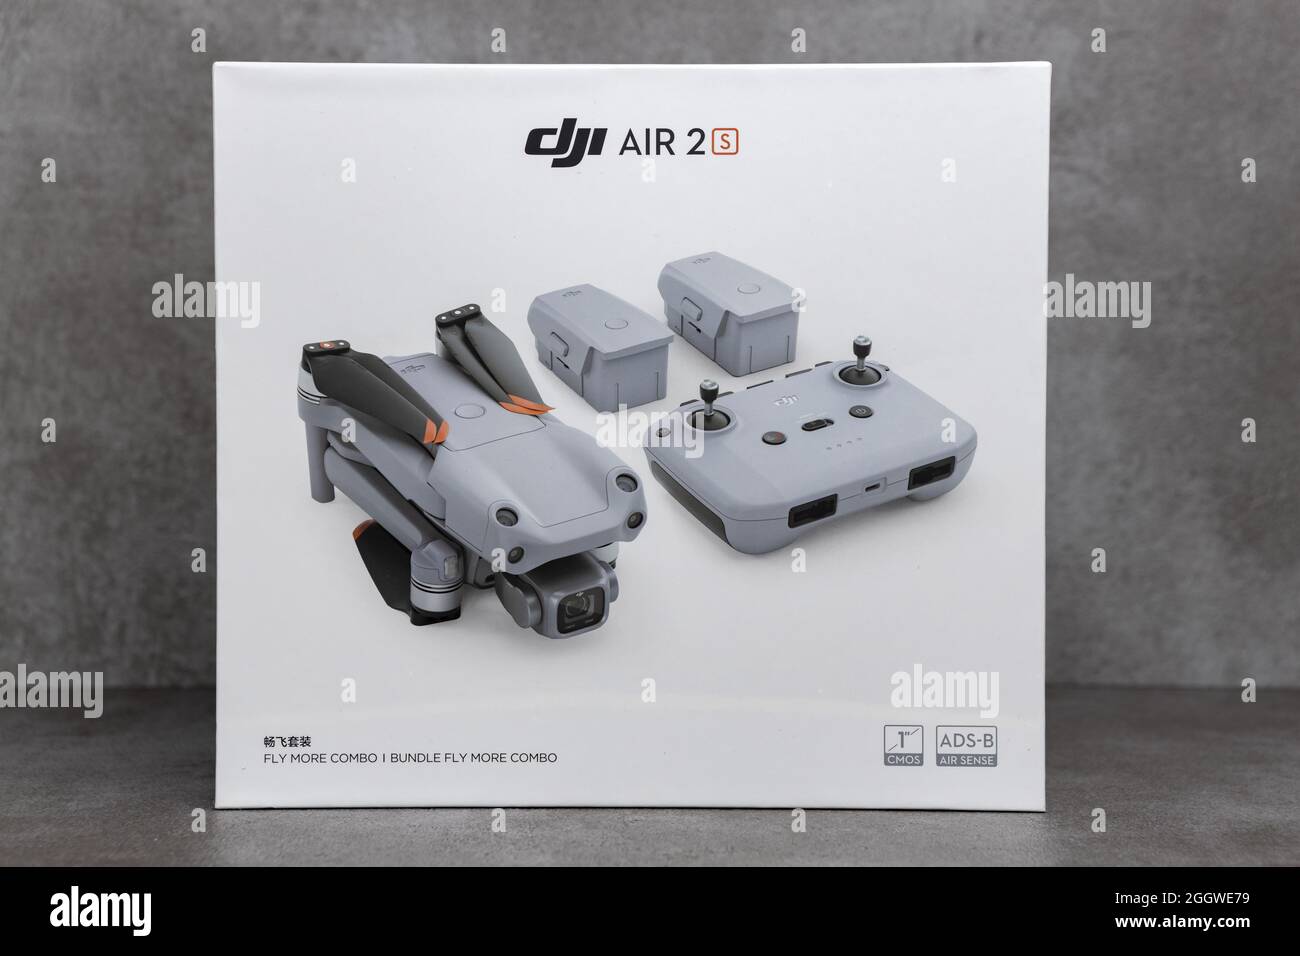 ZUTPHEN, NETHERLANDS - Aug 06, 2021: RPS product still life of DJI fly more  combo package box portable quadcopter Air 2S drone on stylish contemporary  Stock Photo - Alamy